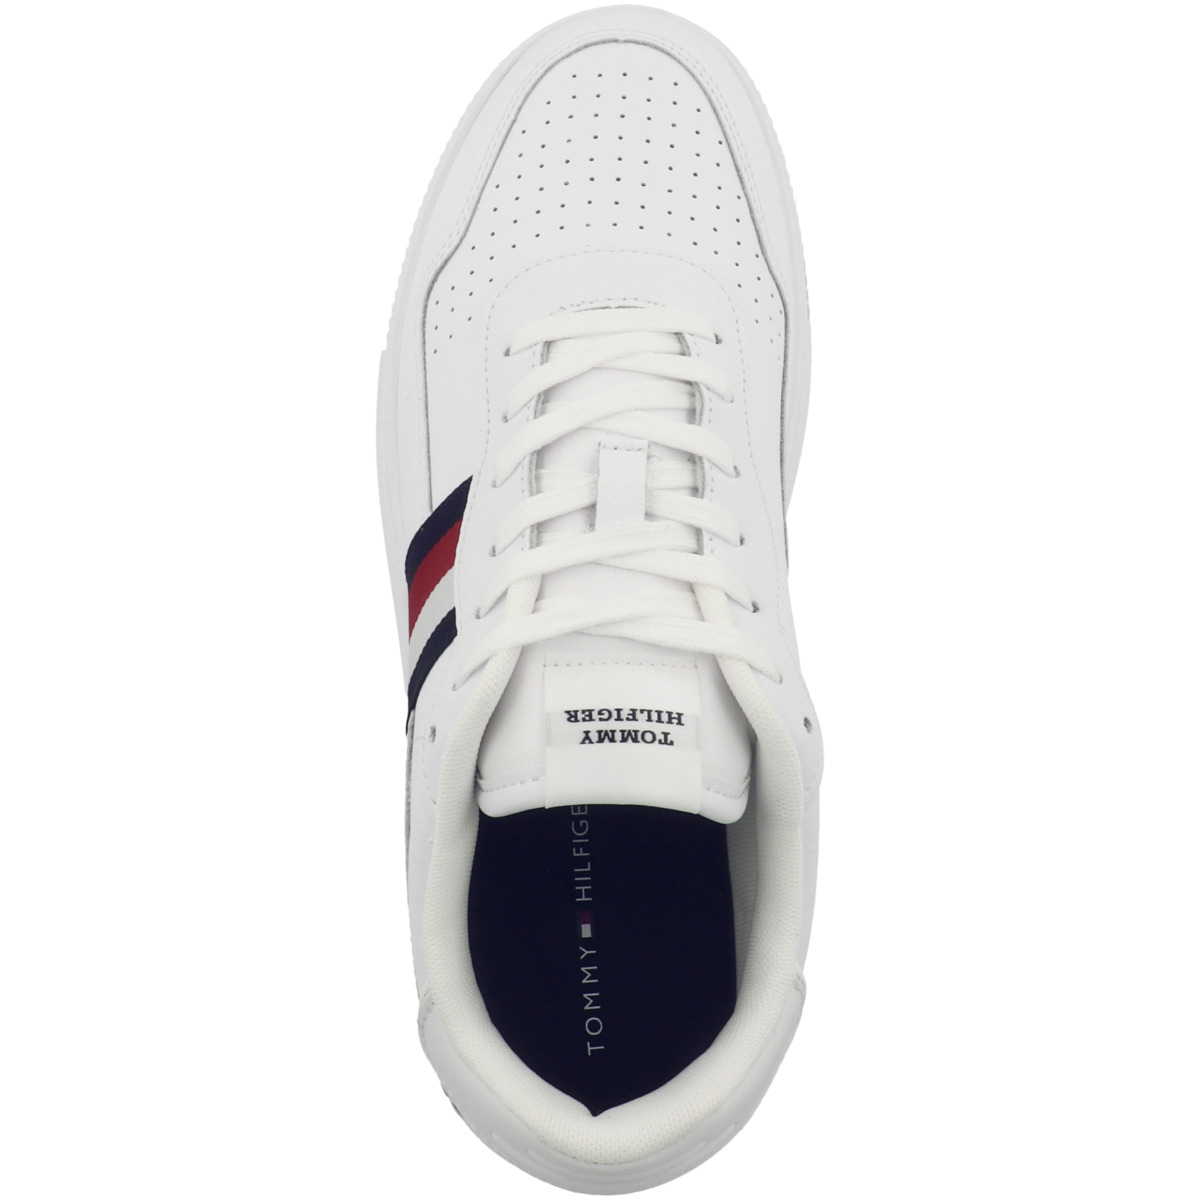 Tommy Hilfiger Supercup Leather Stripes Sneaker weiss